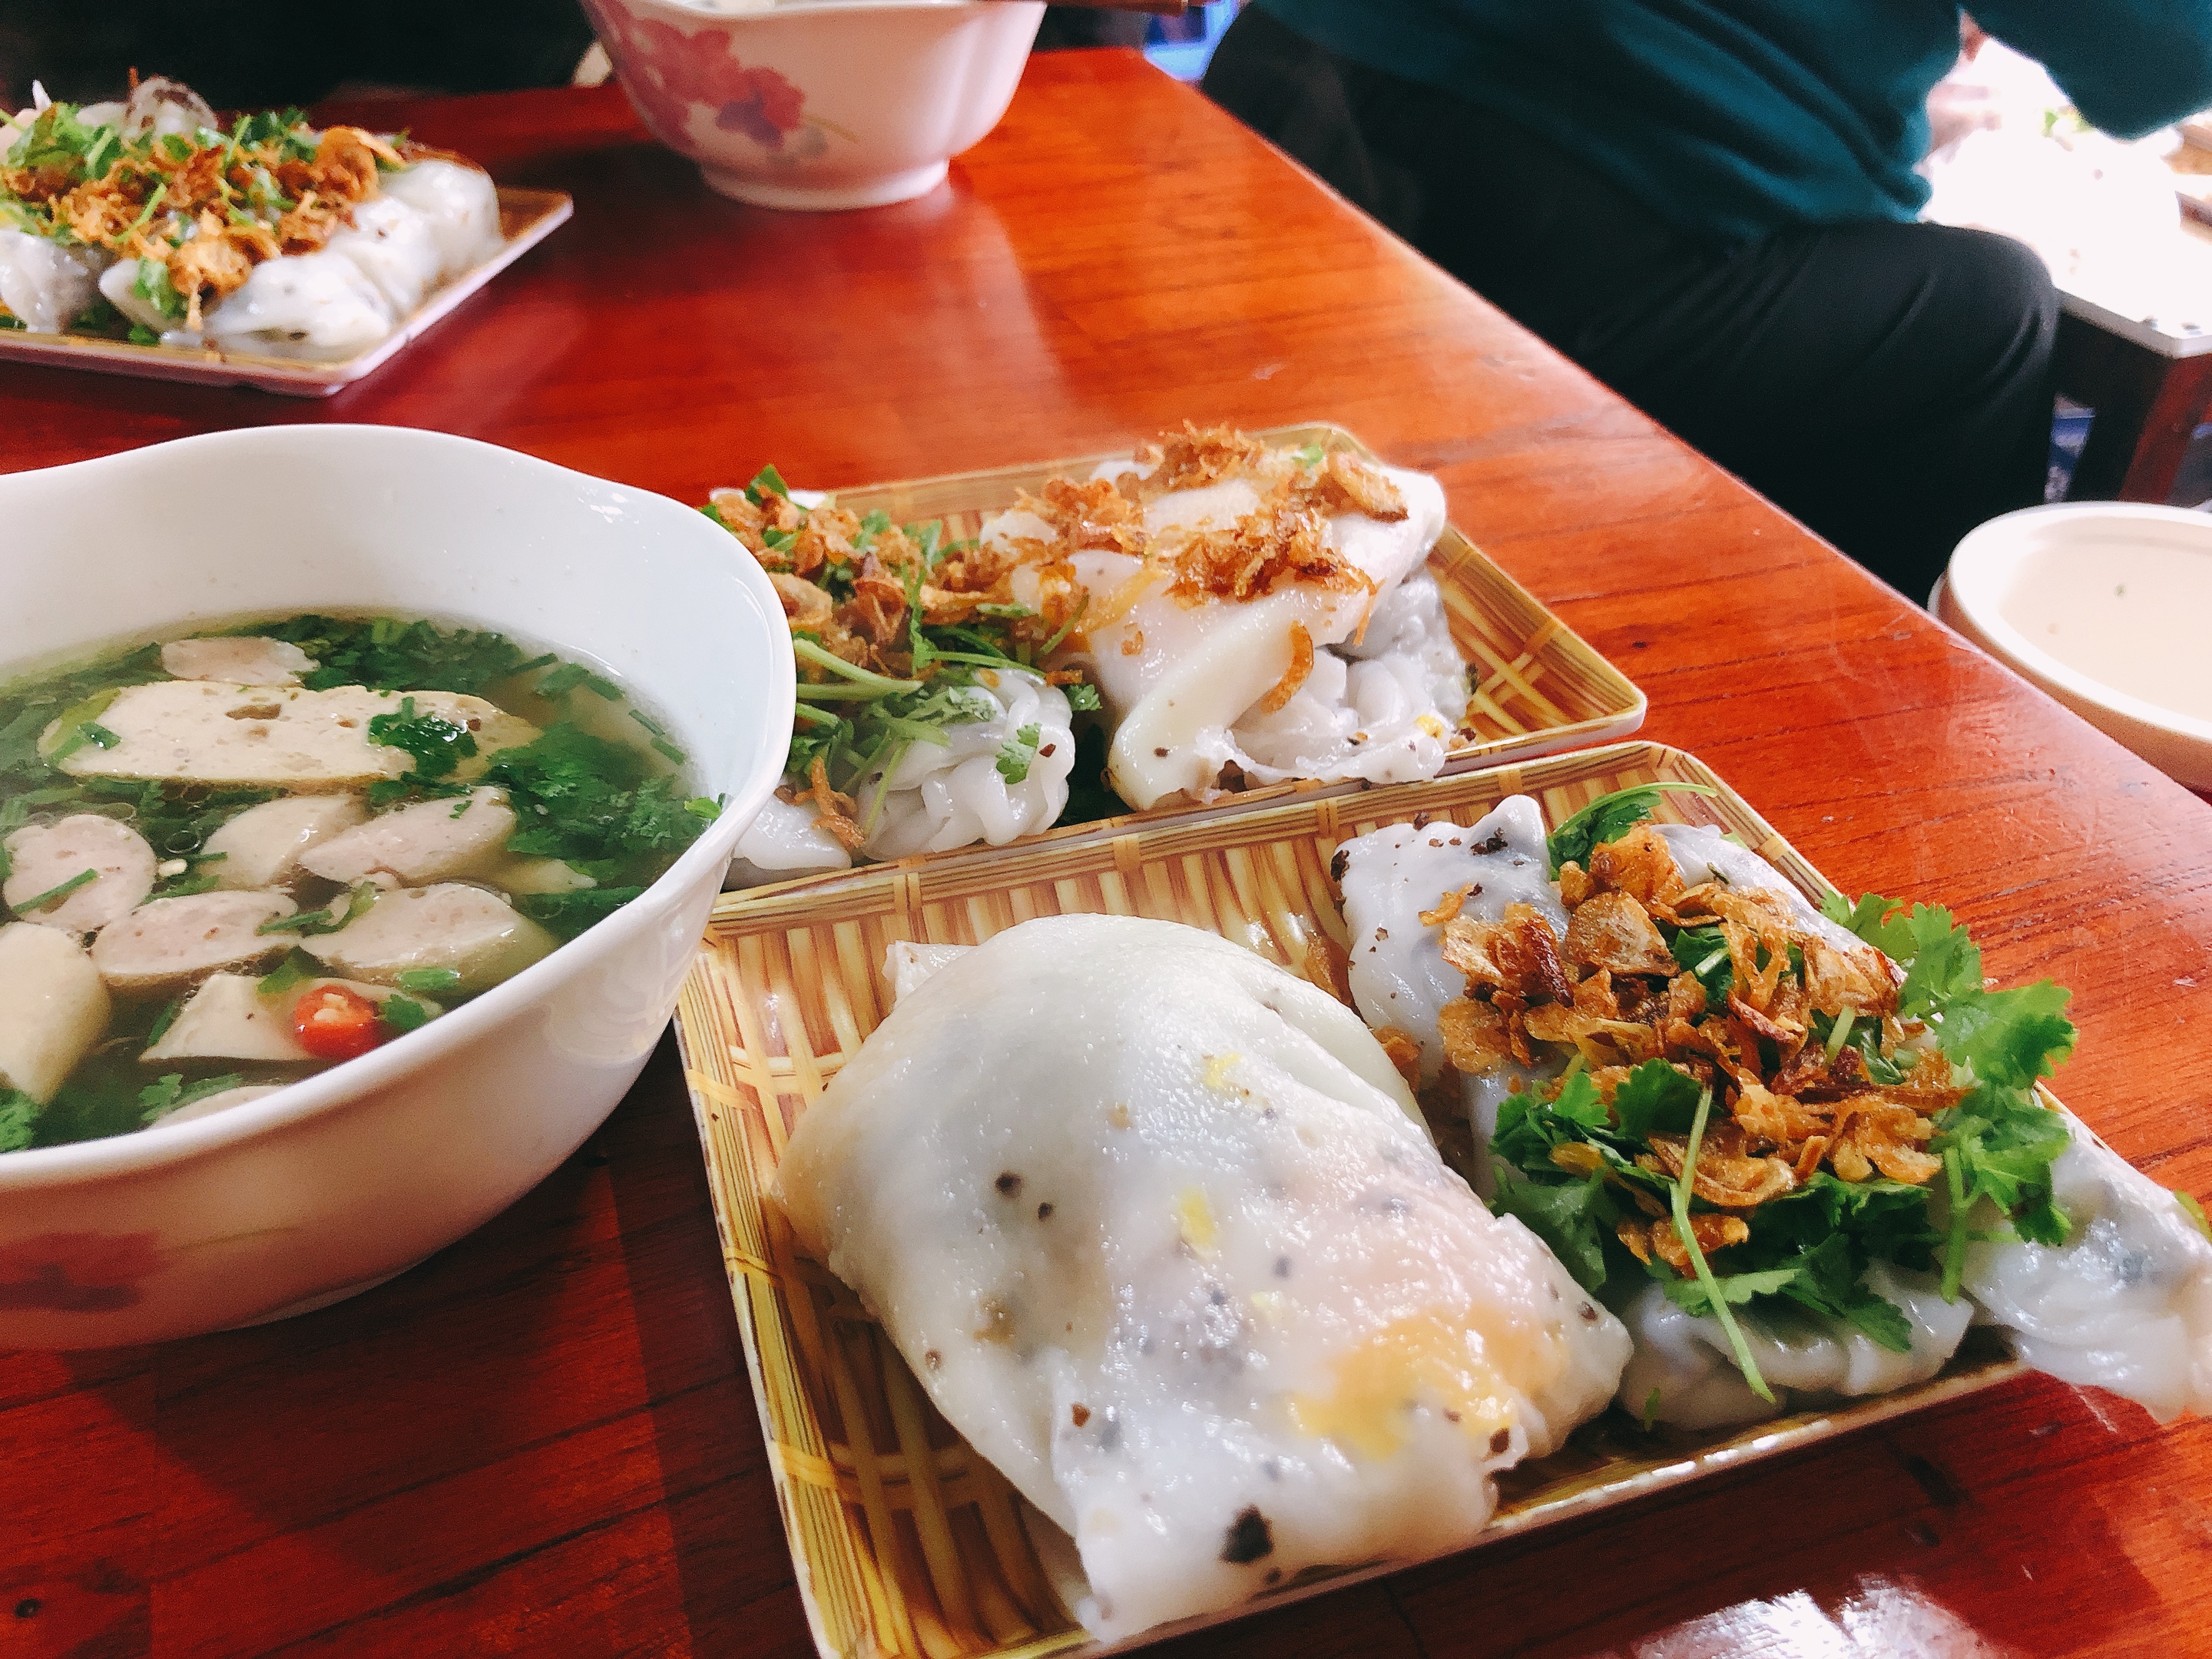 A set of 'banh cuon' served with hot broth in the northern province of Ha Giang. Photo: Bao Anh / Tuoi Tre News